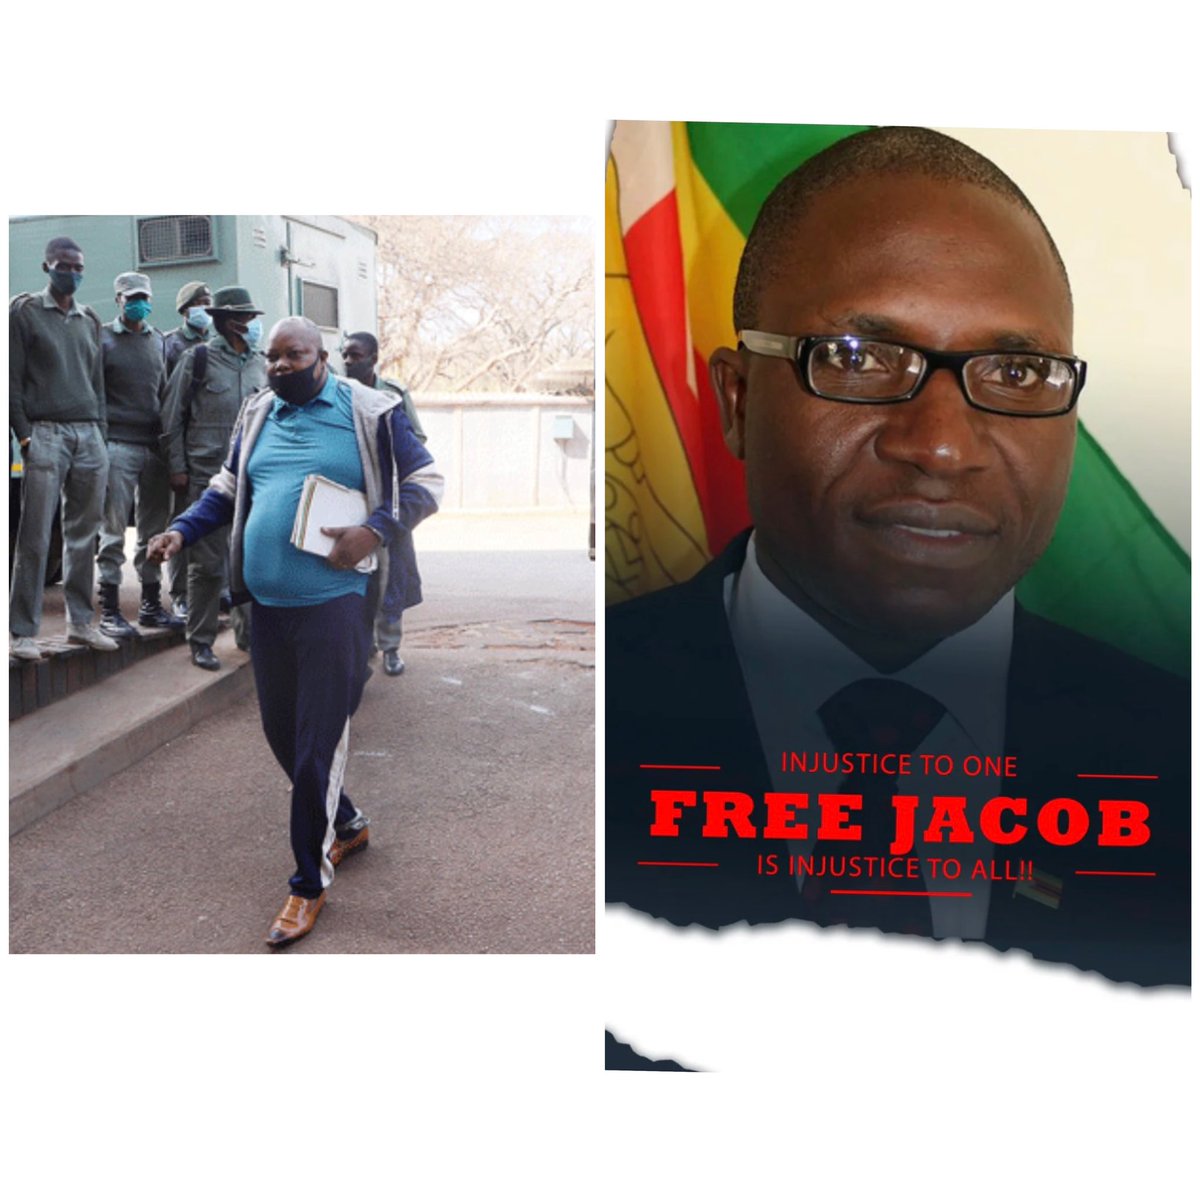 We continue to demand a stop to political percecution of @JobSikhala1 &  @NgarivhumeJacob . The unlawful arrests and detention of political prisoners must stop. It's not a crime to have a different view from the regime
#FreeJobSikhala
#FreeJacobNgarivhume